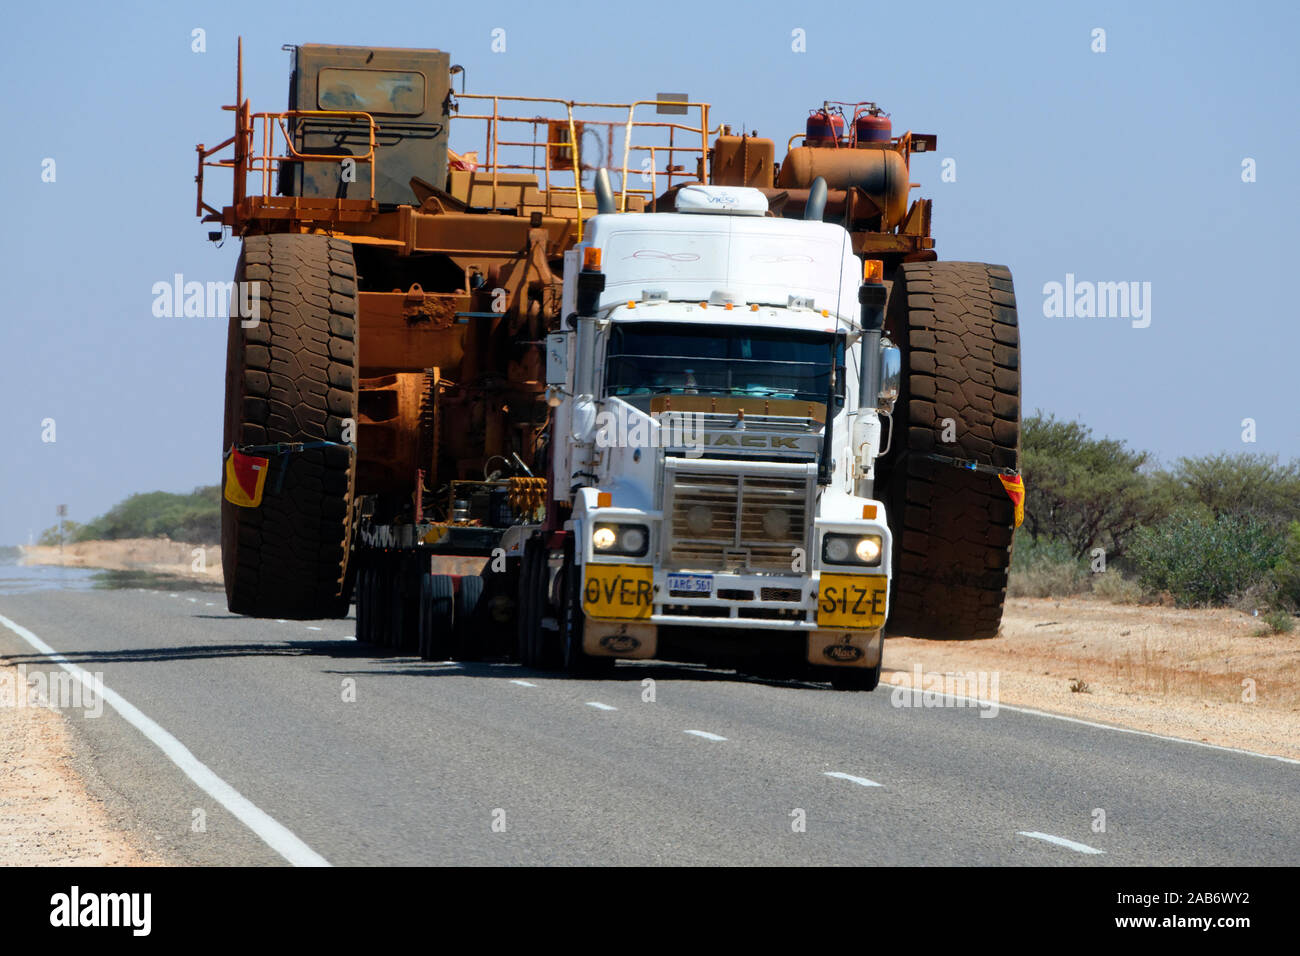 Over size road transport of a Dump truck on a very hot outback highway with heat shimmer, Western Australia Stock Photo